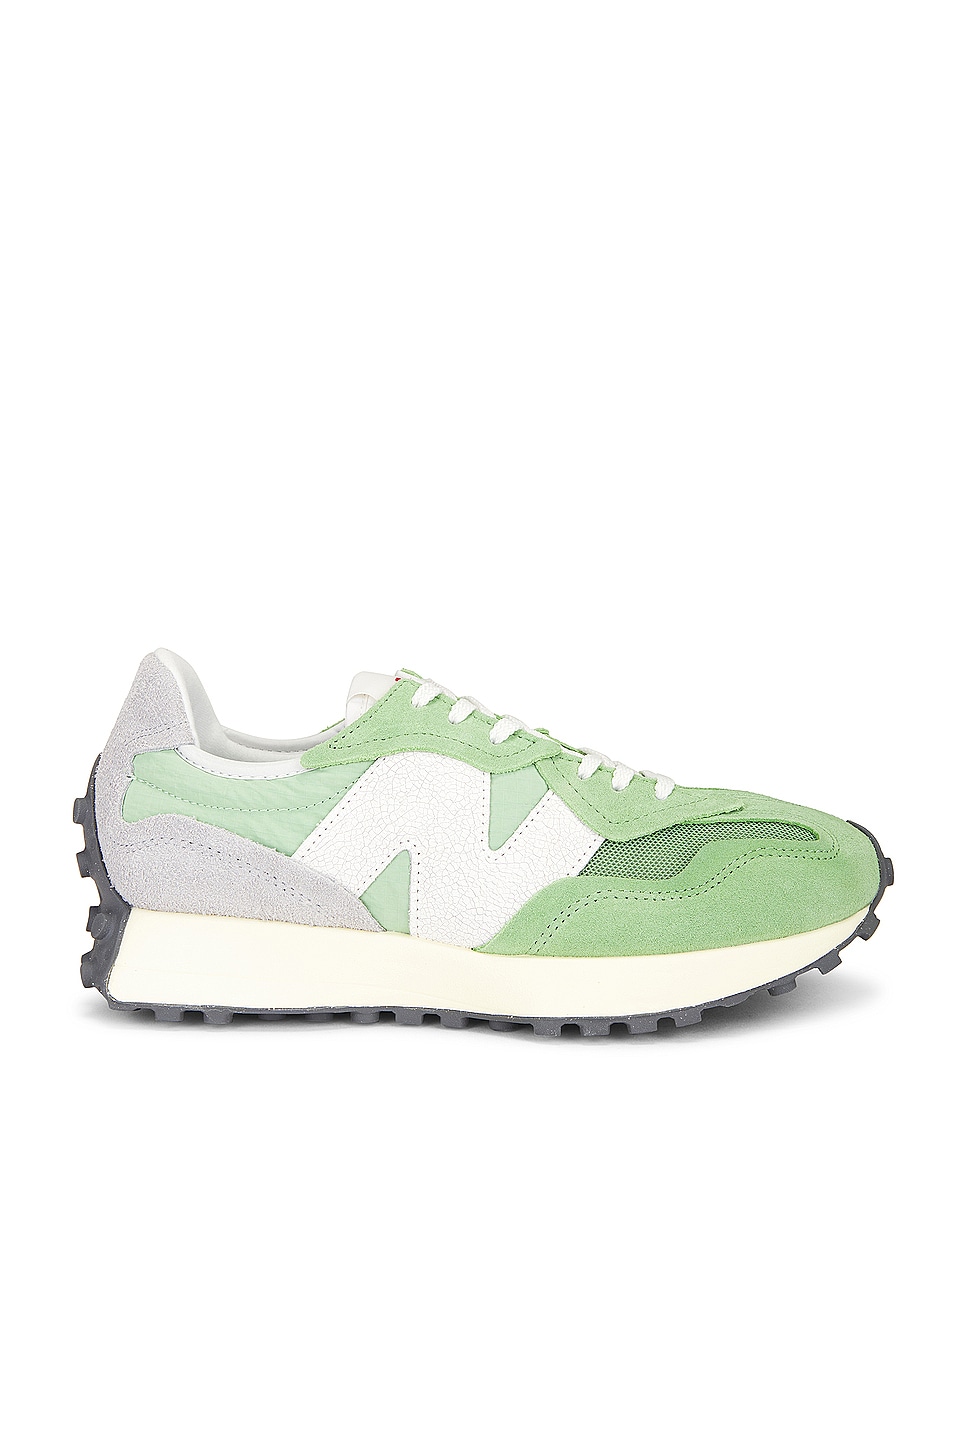 Image 1 of New Balance 327 in Chive & Avocado